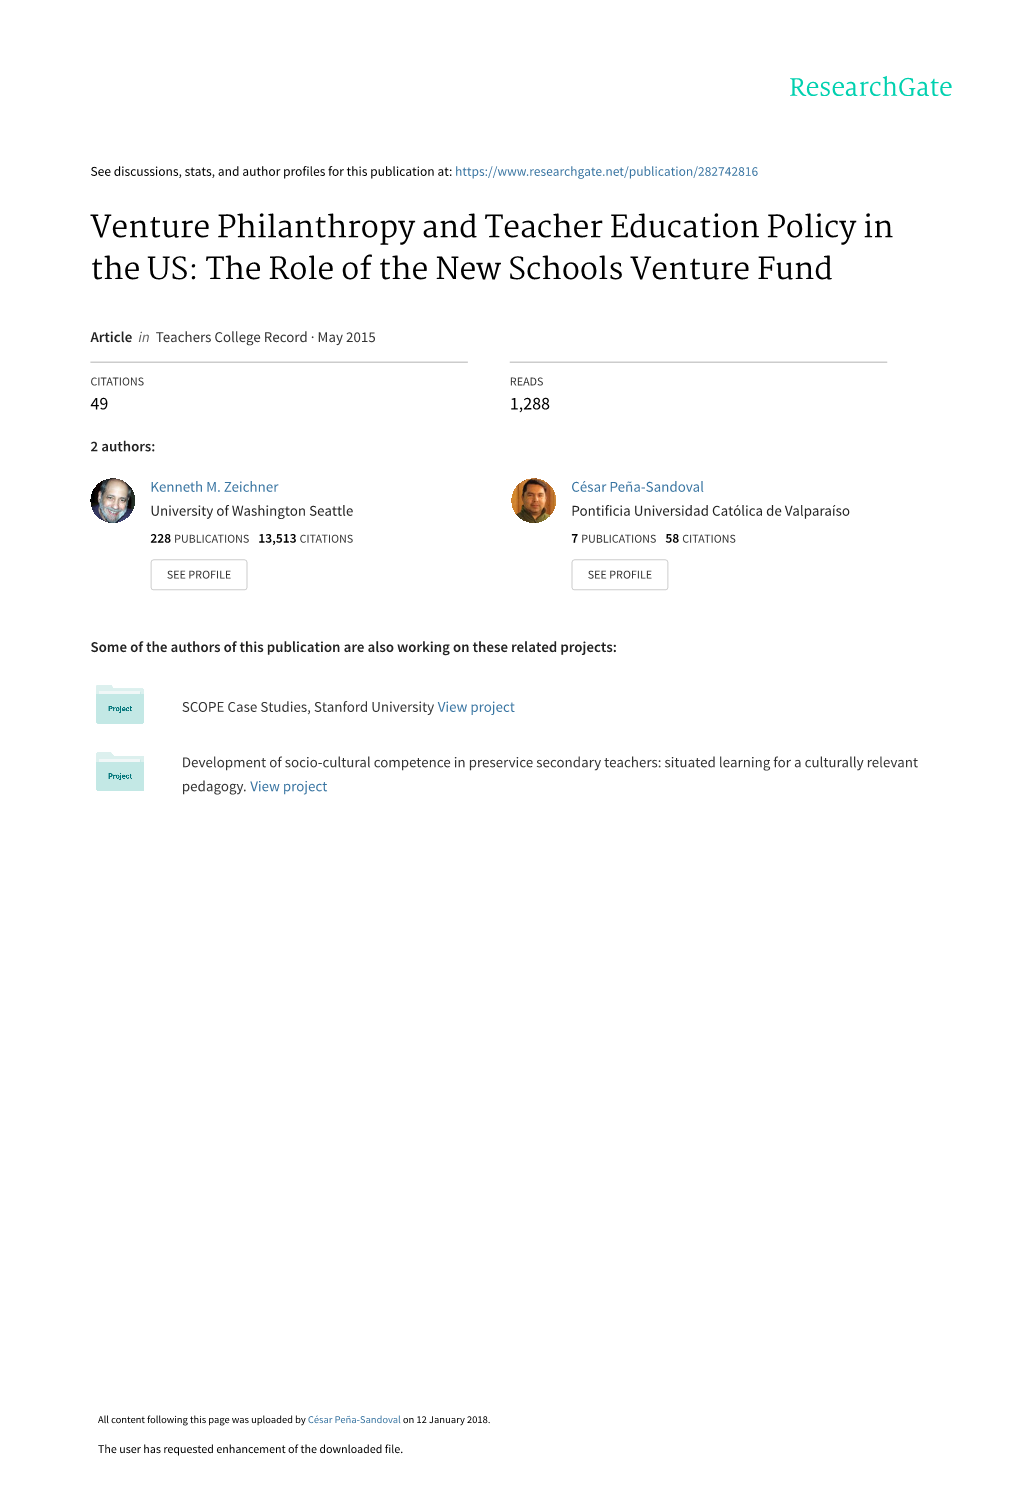 Venture Philanthropy and Teacher Education Policy in the US: the Role of the New Schools Venture Fund